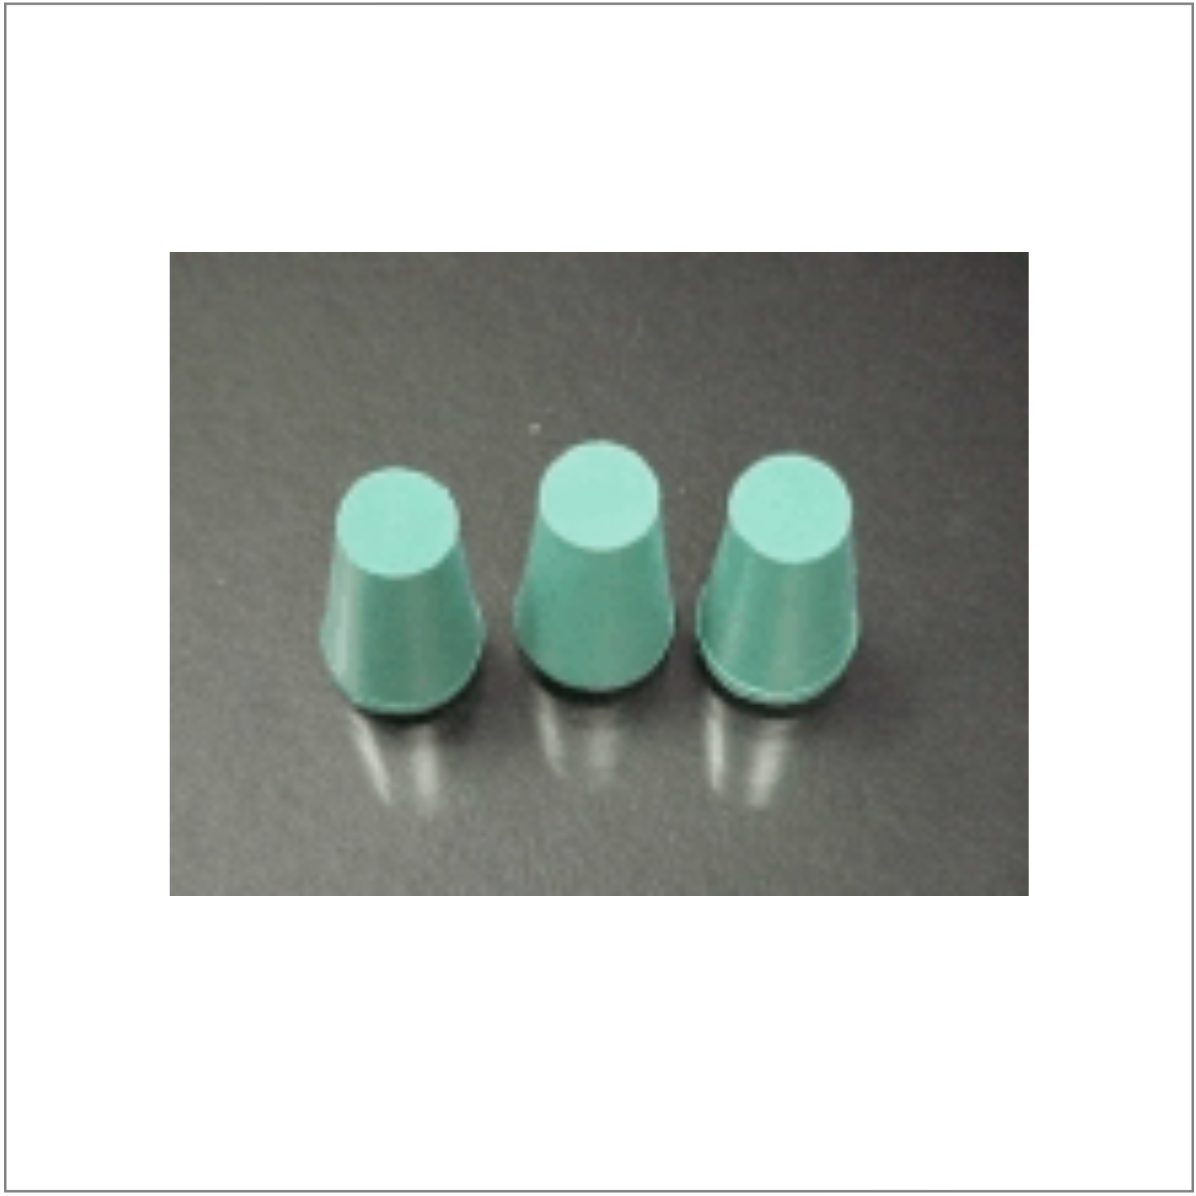 Filtron Rubber Stoppers